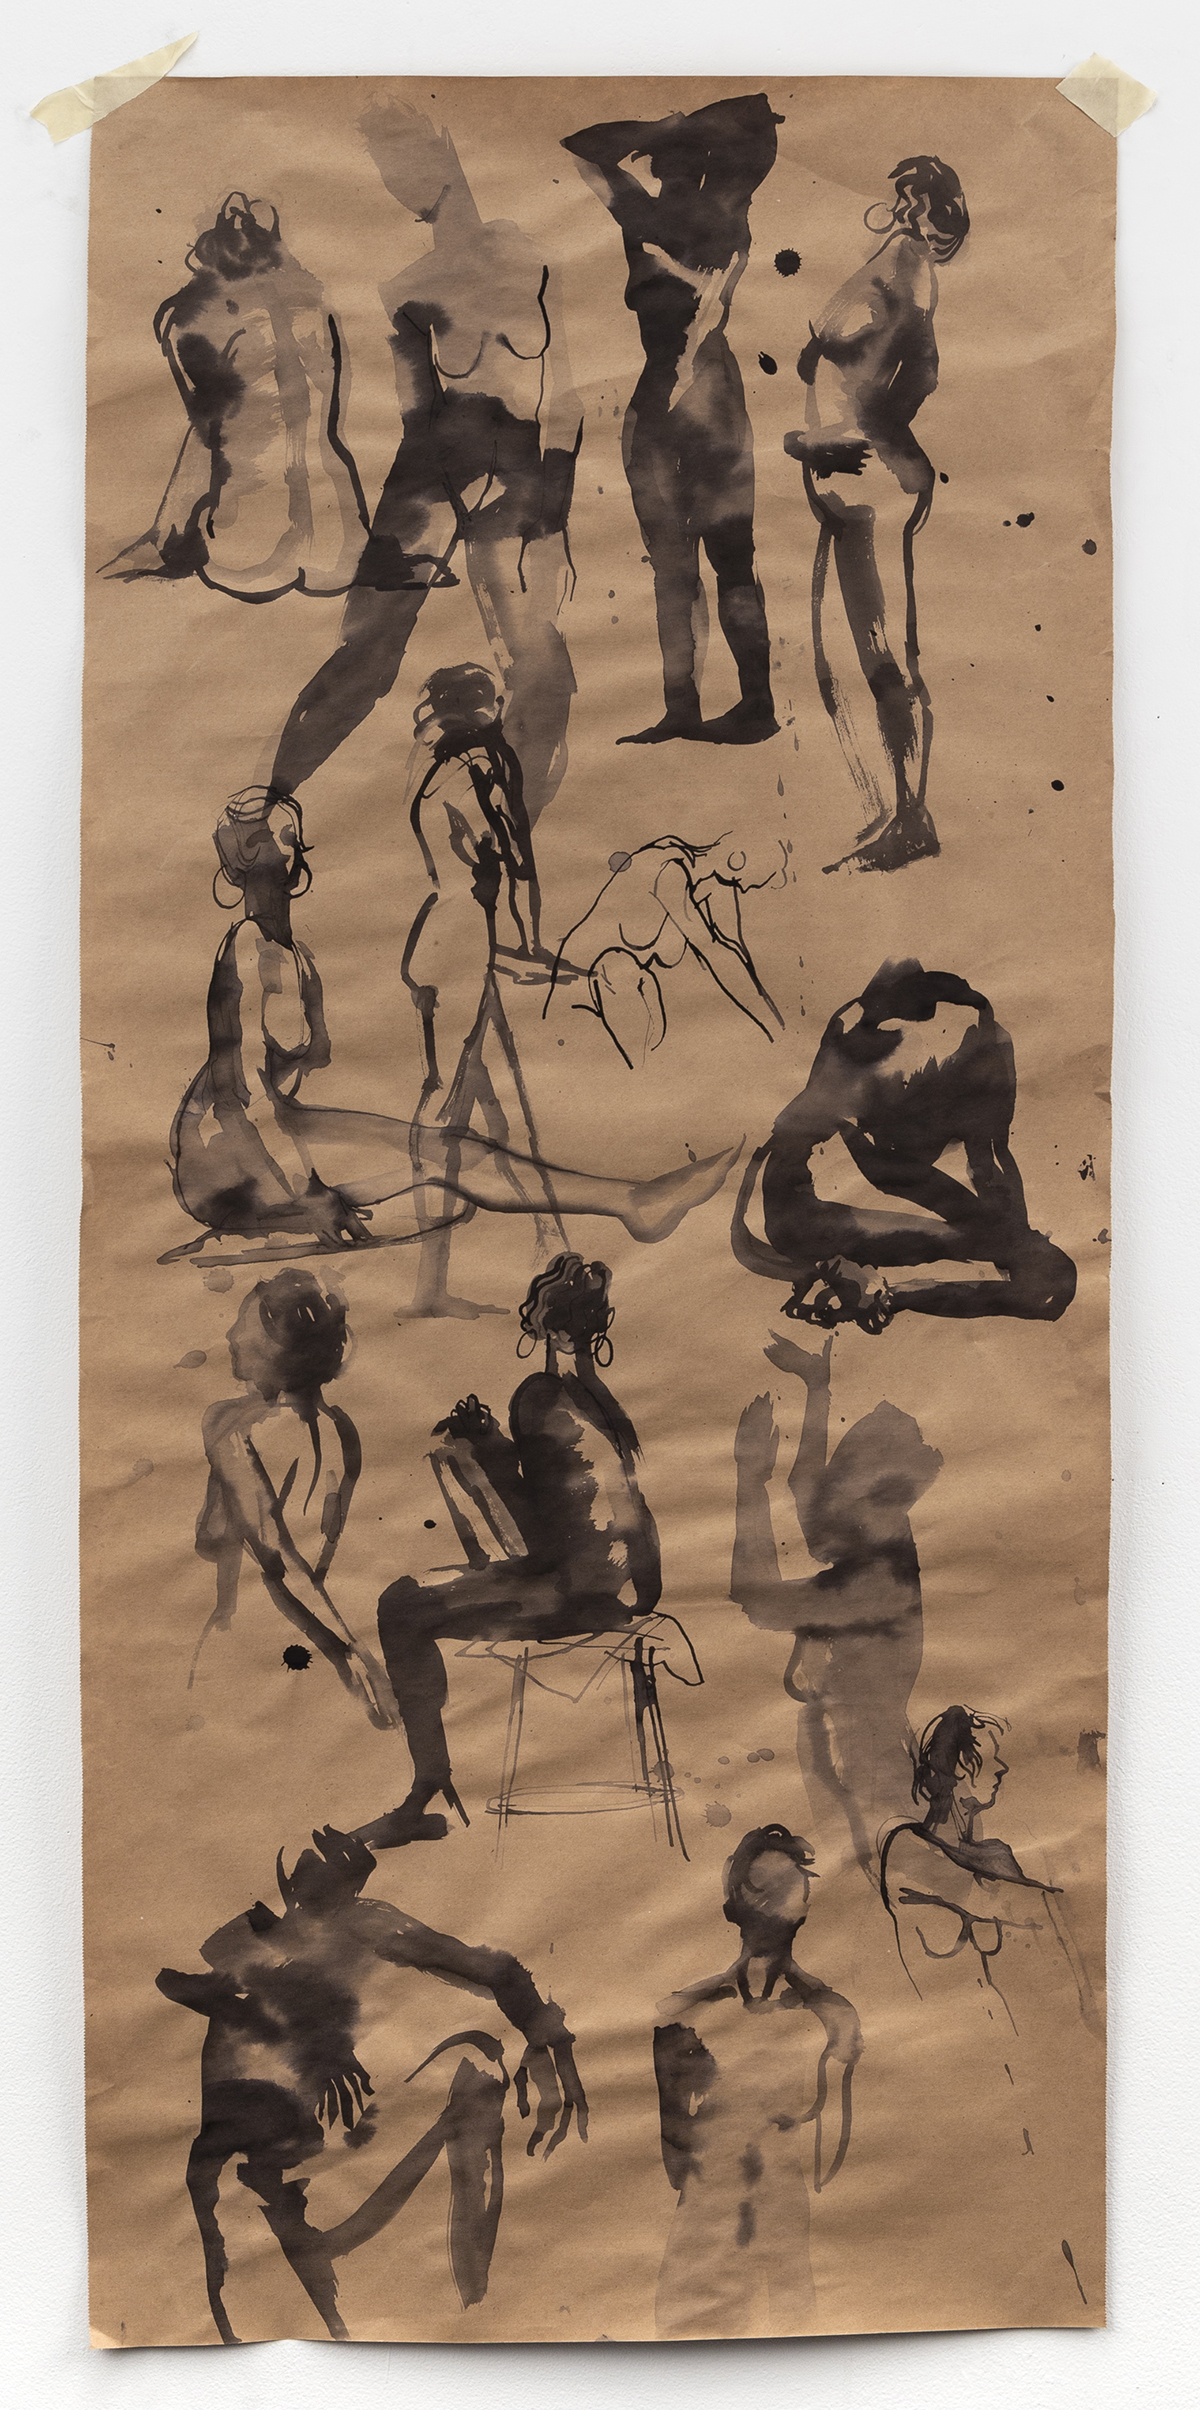 A splash of inked figure drawings in various short poses on butcher paper